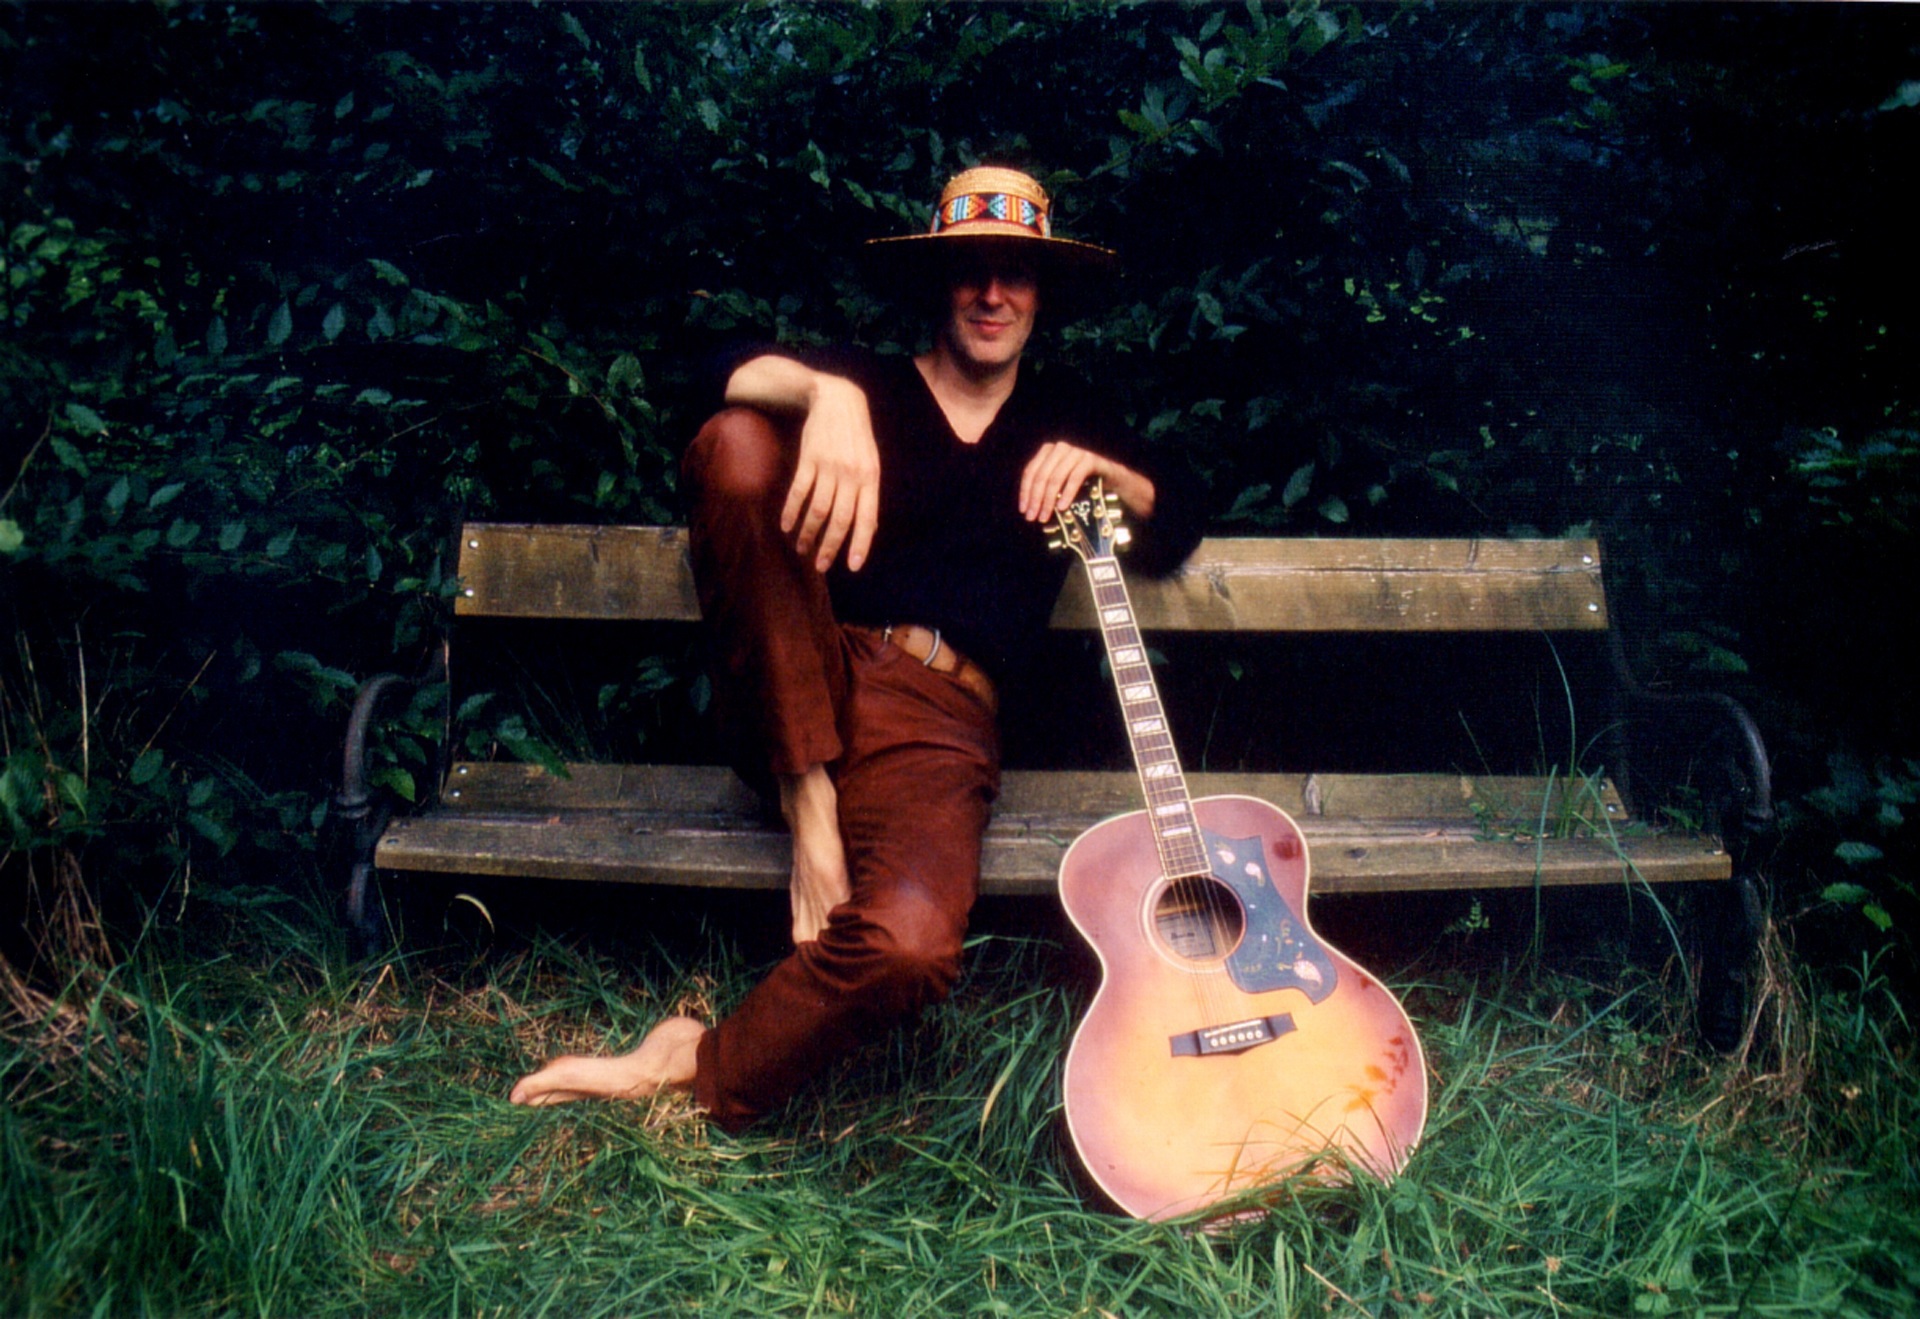 Man wearing brown leather trousers sitting on a bench and leaning on a guitar